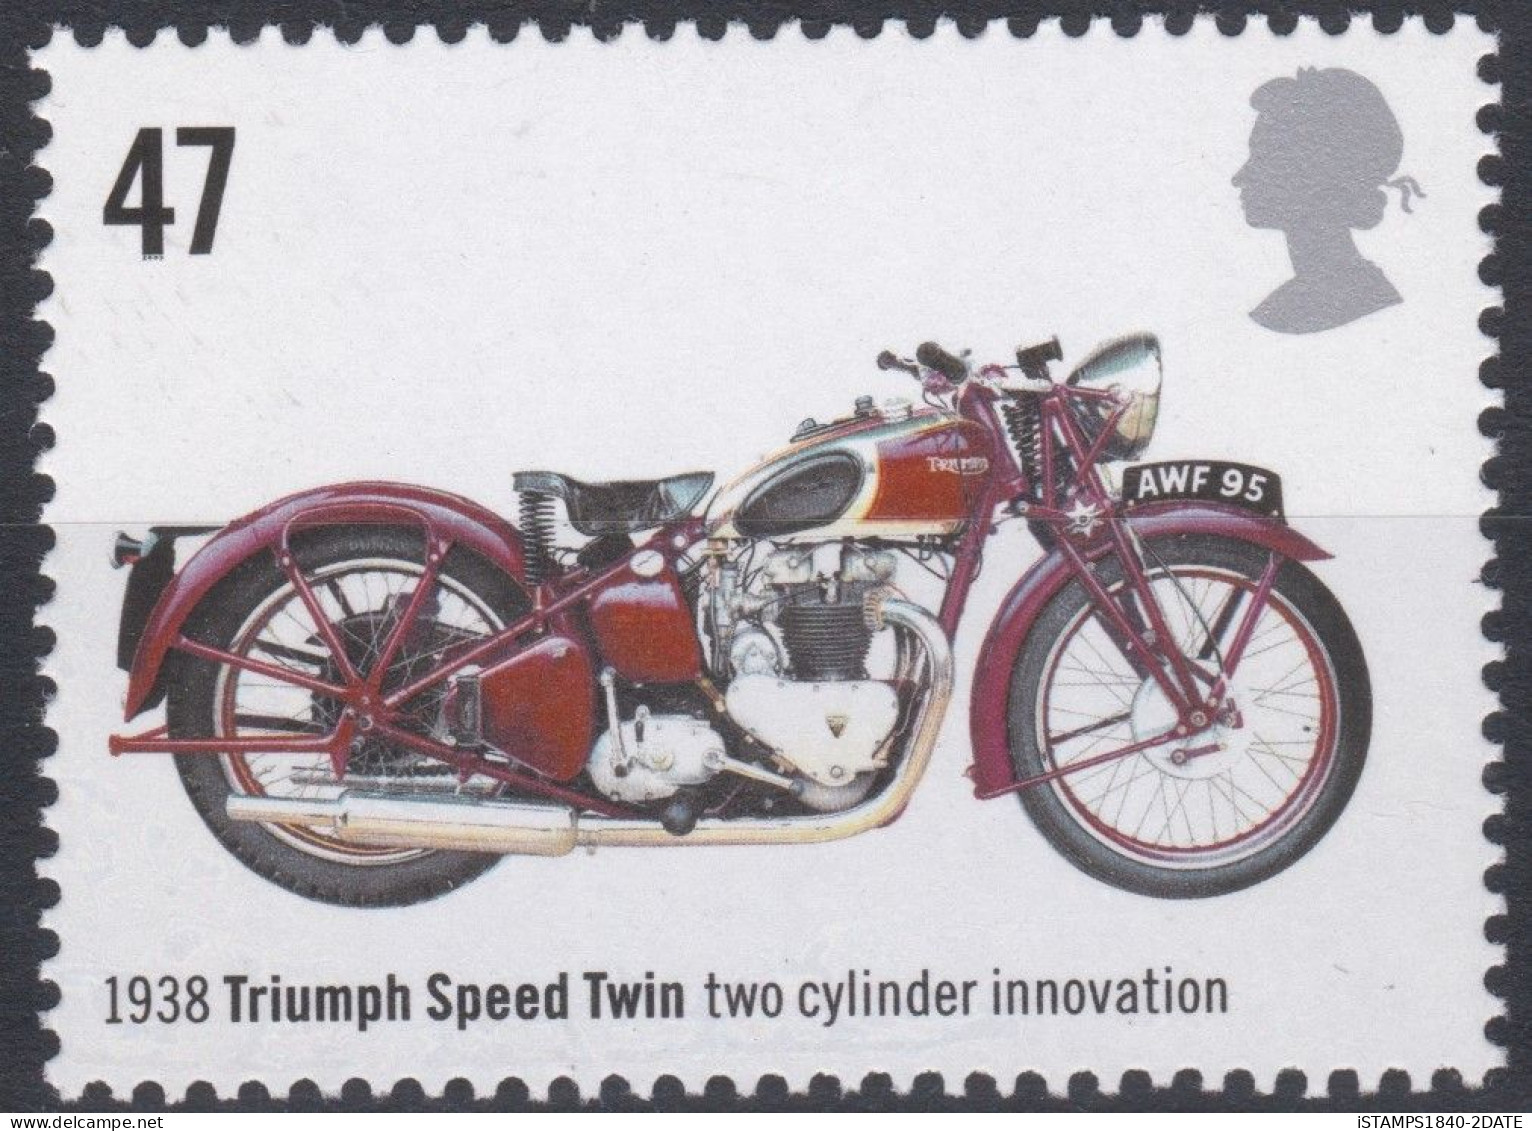 00863/Great Britain 2005 Sg2551 47p Multicoloured MNH Triumph Speed Twin, Two Cylinder Innovation (1938) - Motorbikes